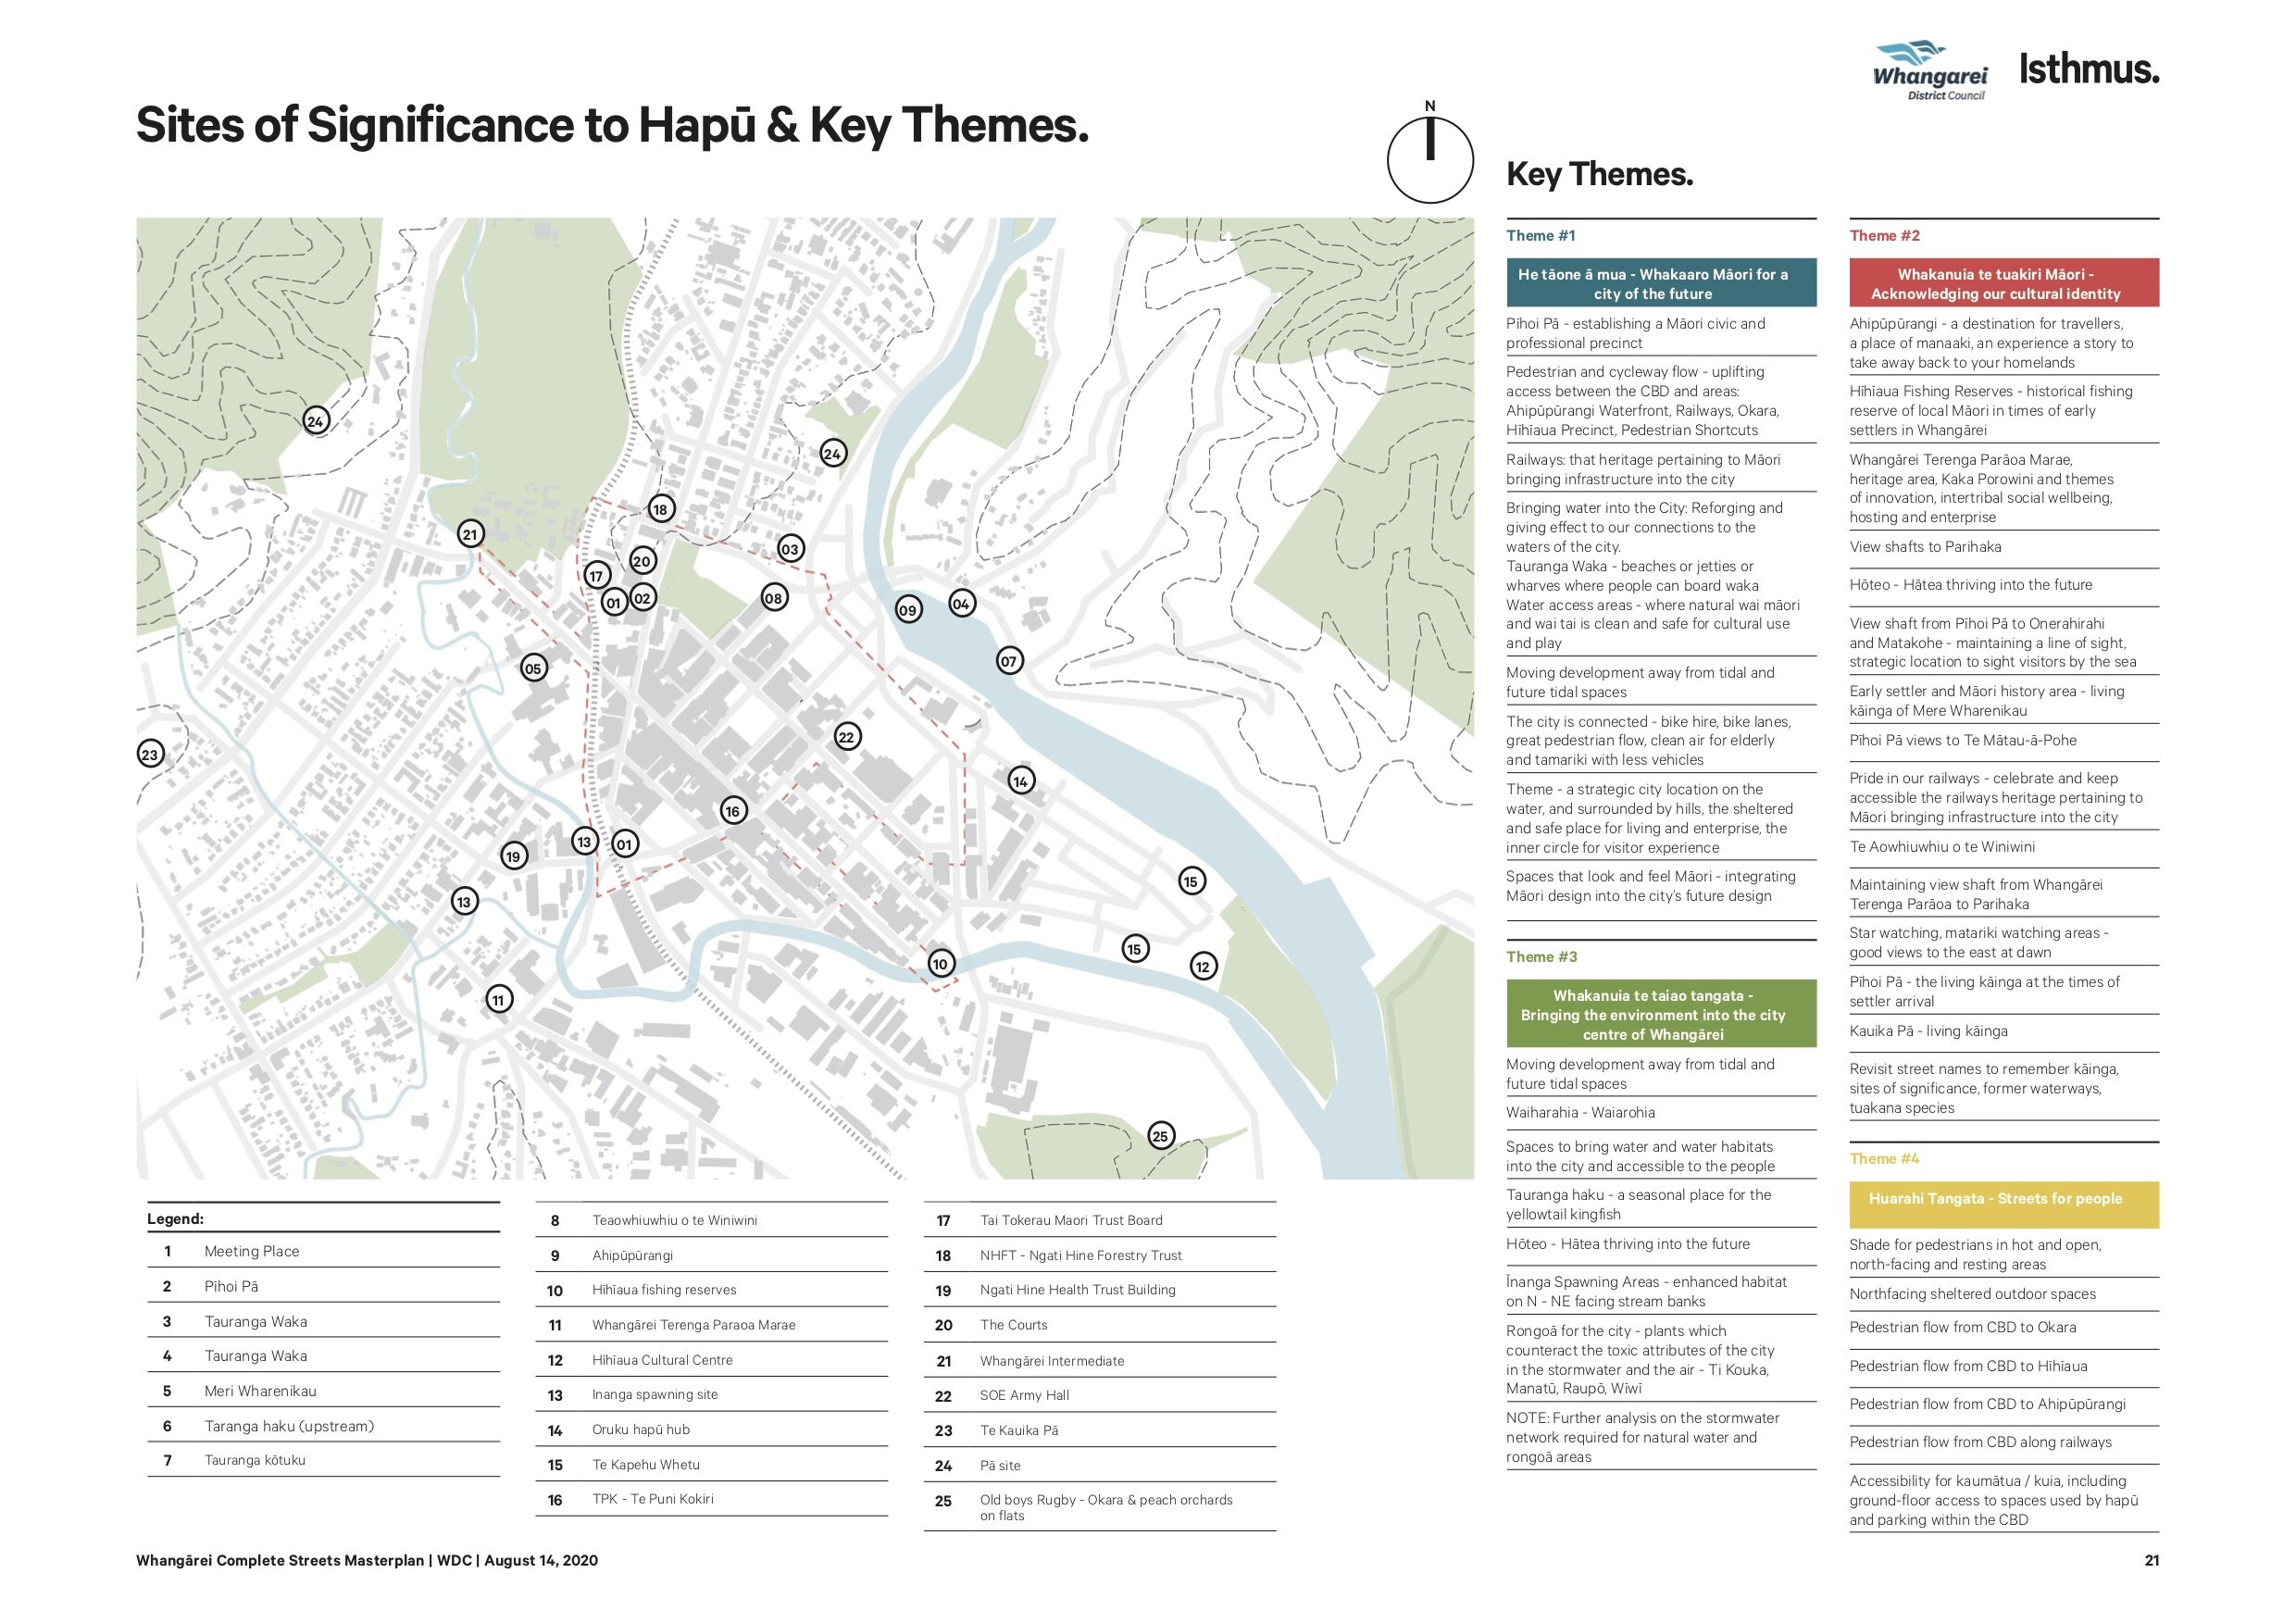 Whangarei_Complete_Streets_Masterplan_and_Design_Manual_21.jpg